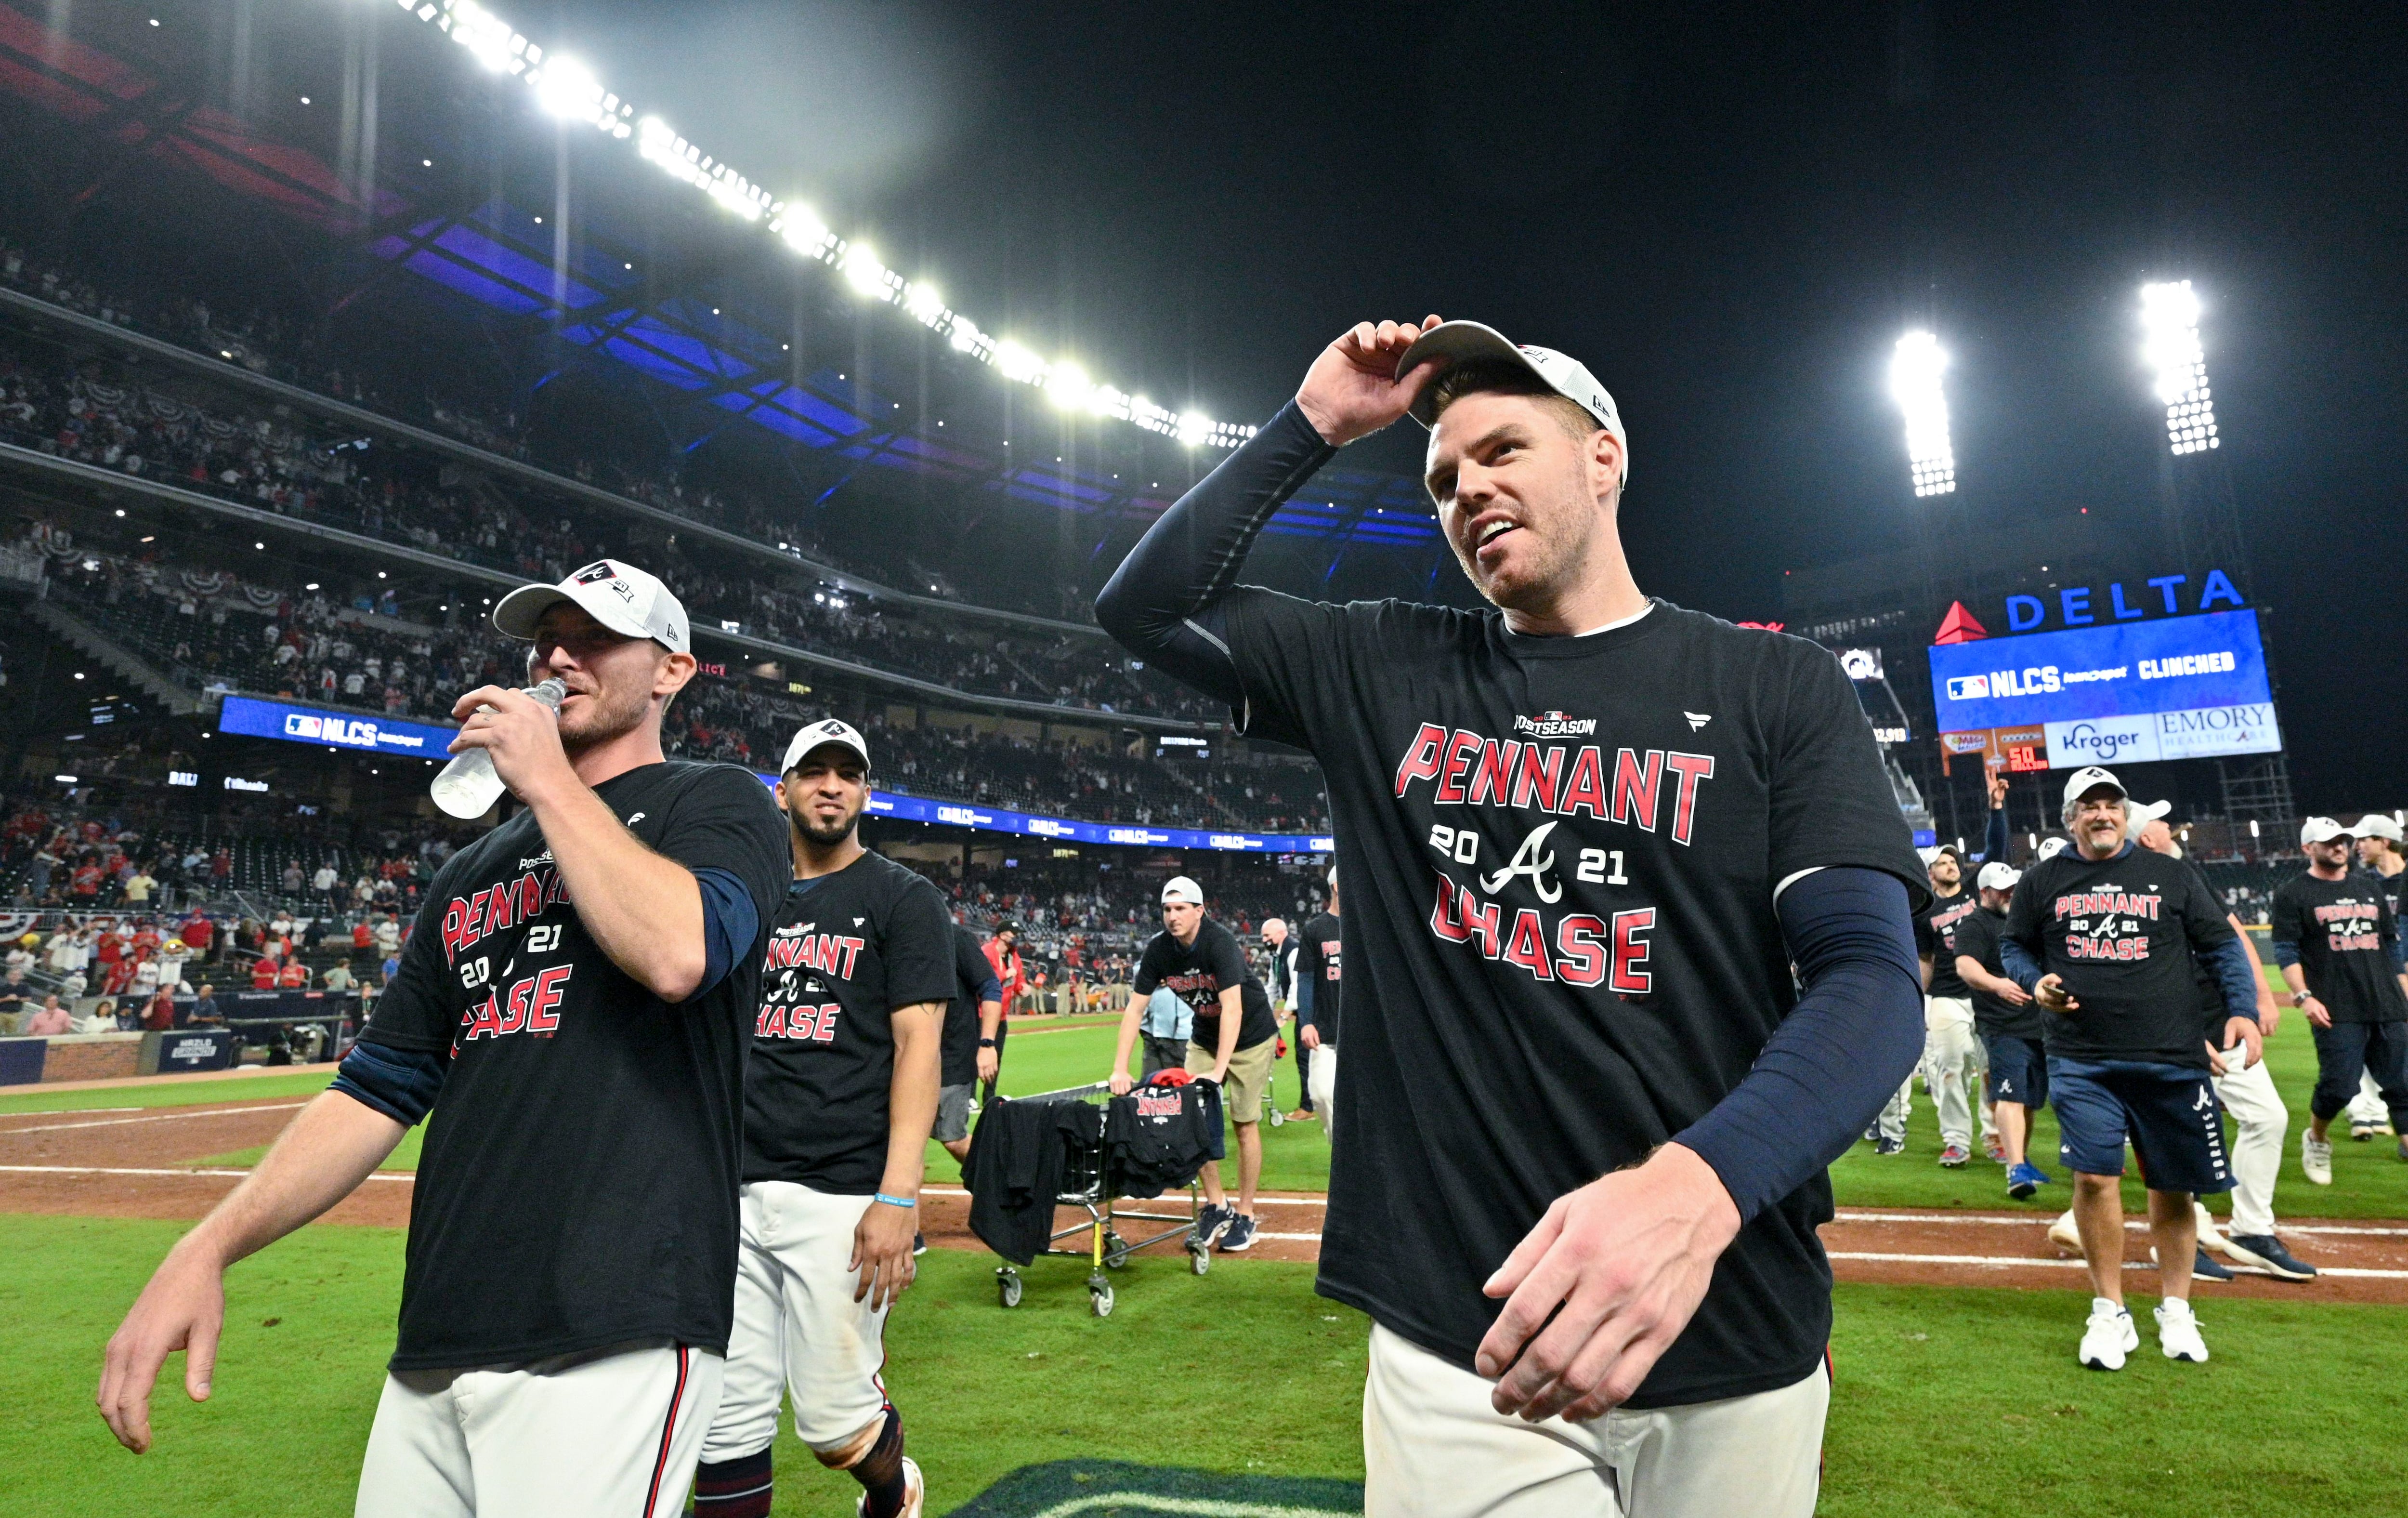 Congrats, Atlanta!, Atlanta Braves, Atlanta, The Atlanta Braves are the  2021 NLCS™ champs! And we're here to help you celebrate the big win with  officially licensed championship gear online now